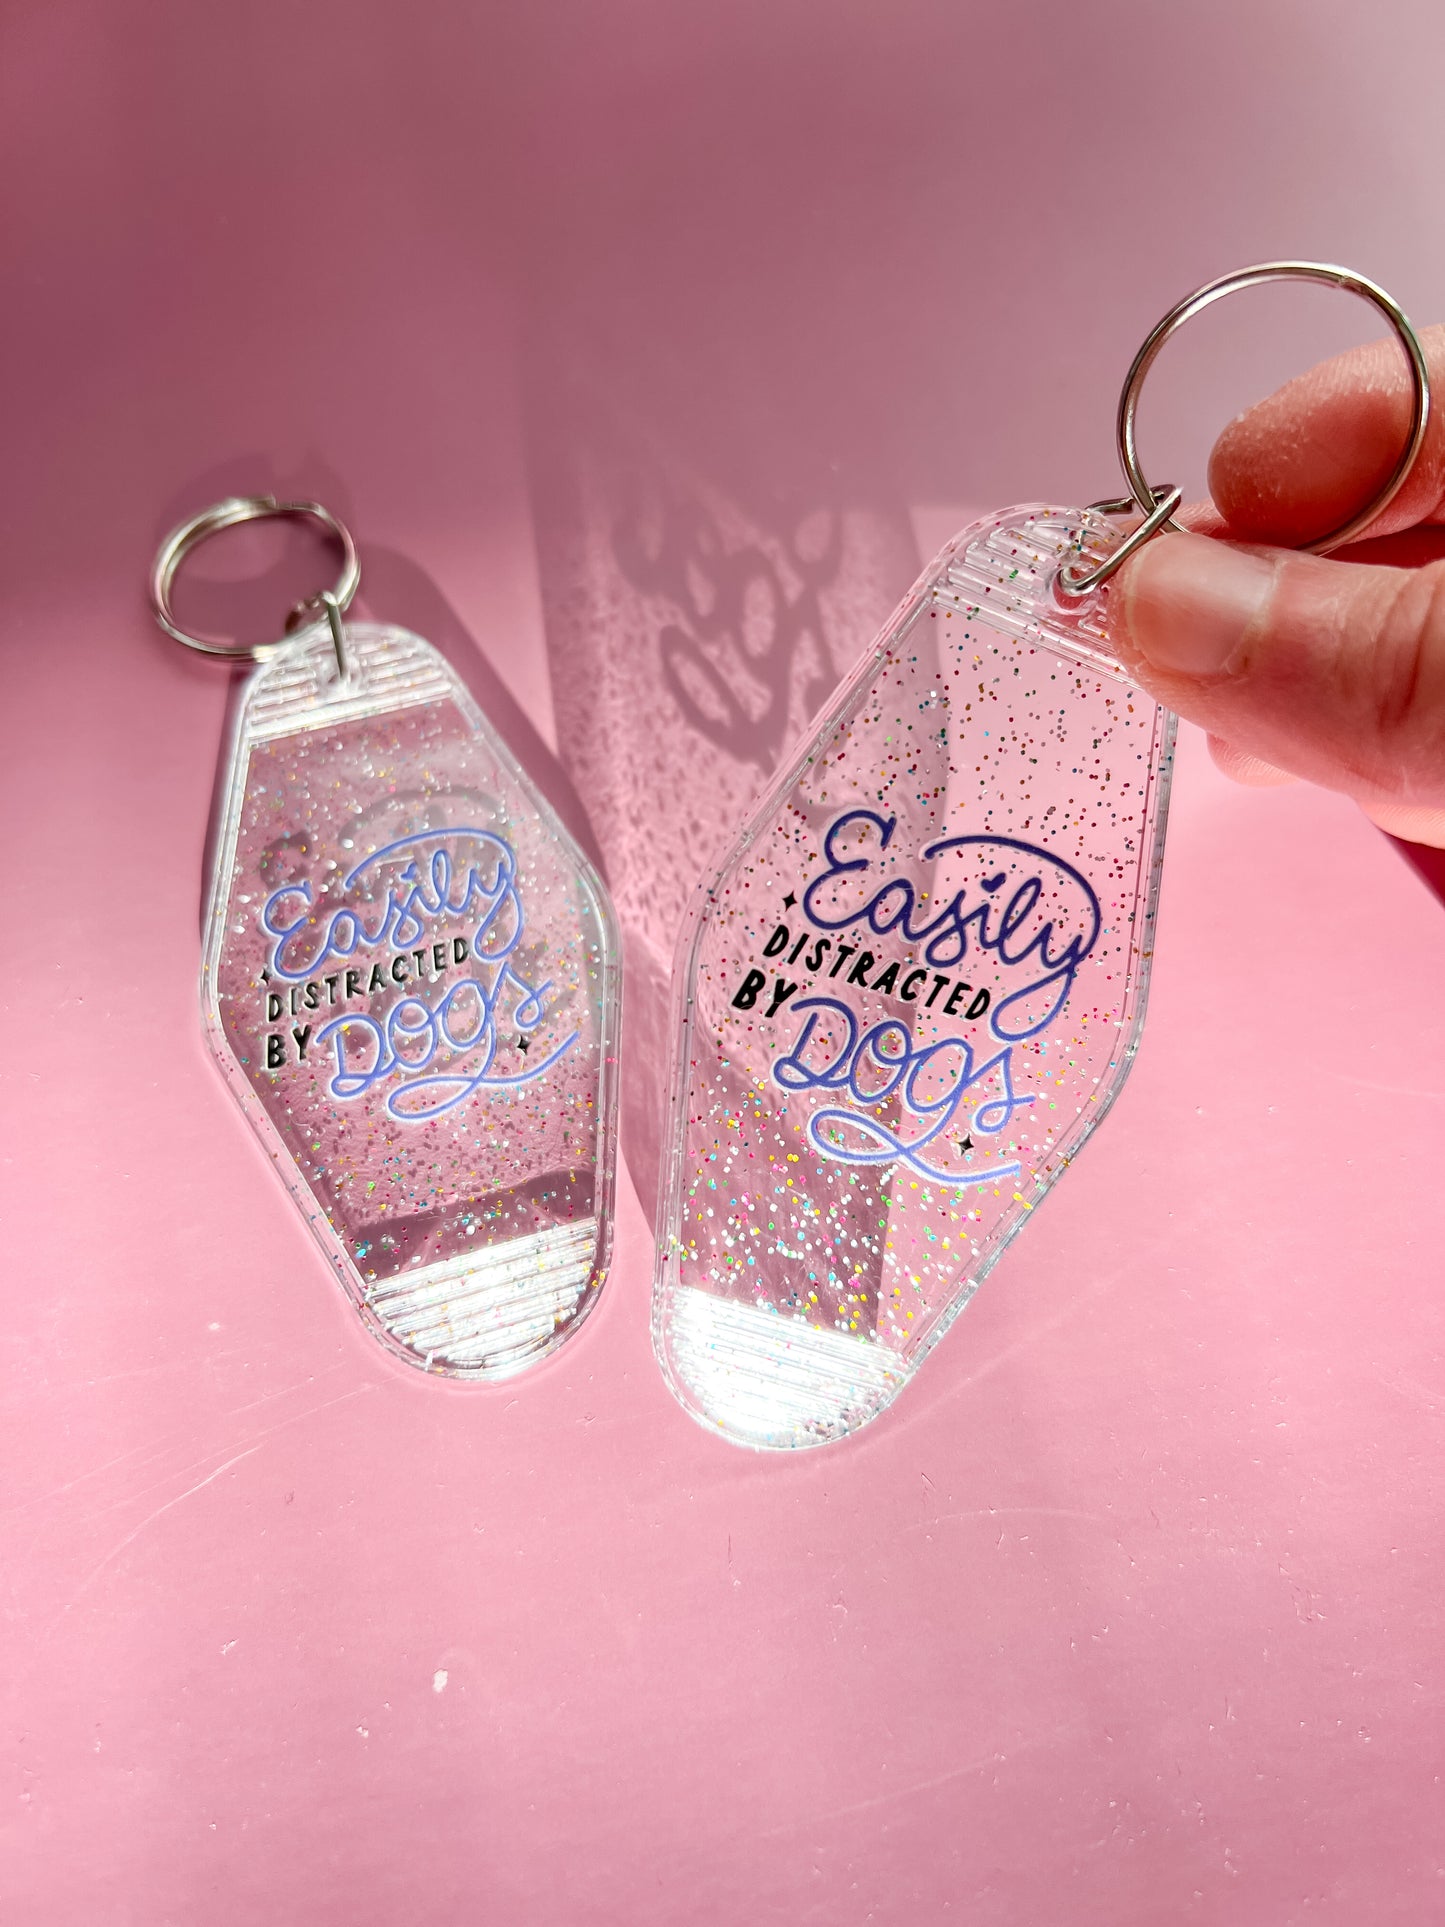 Easily Distracted by Dogs Motel Keychain